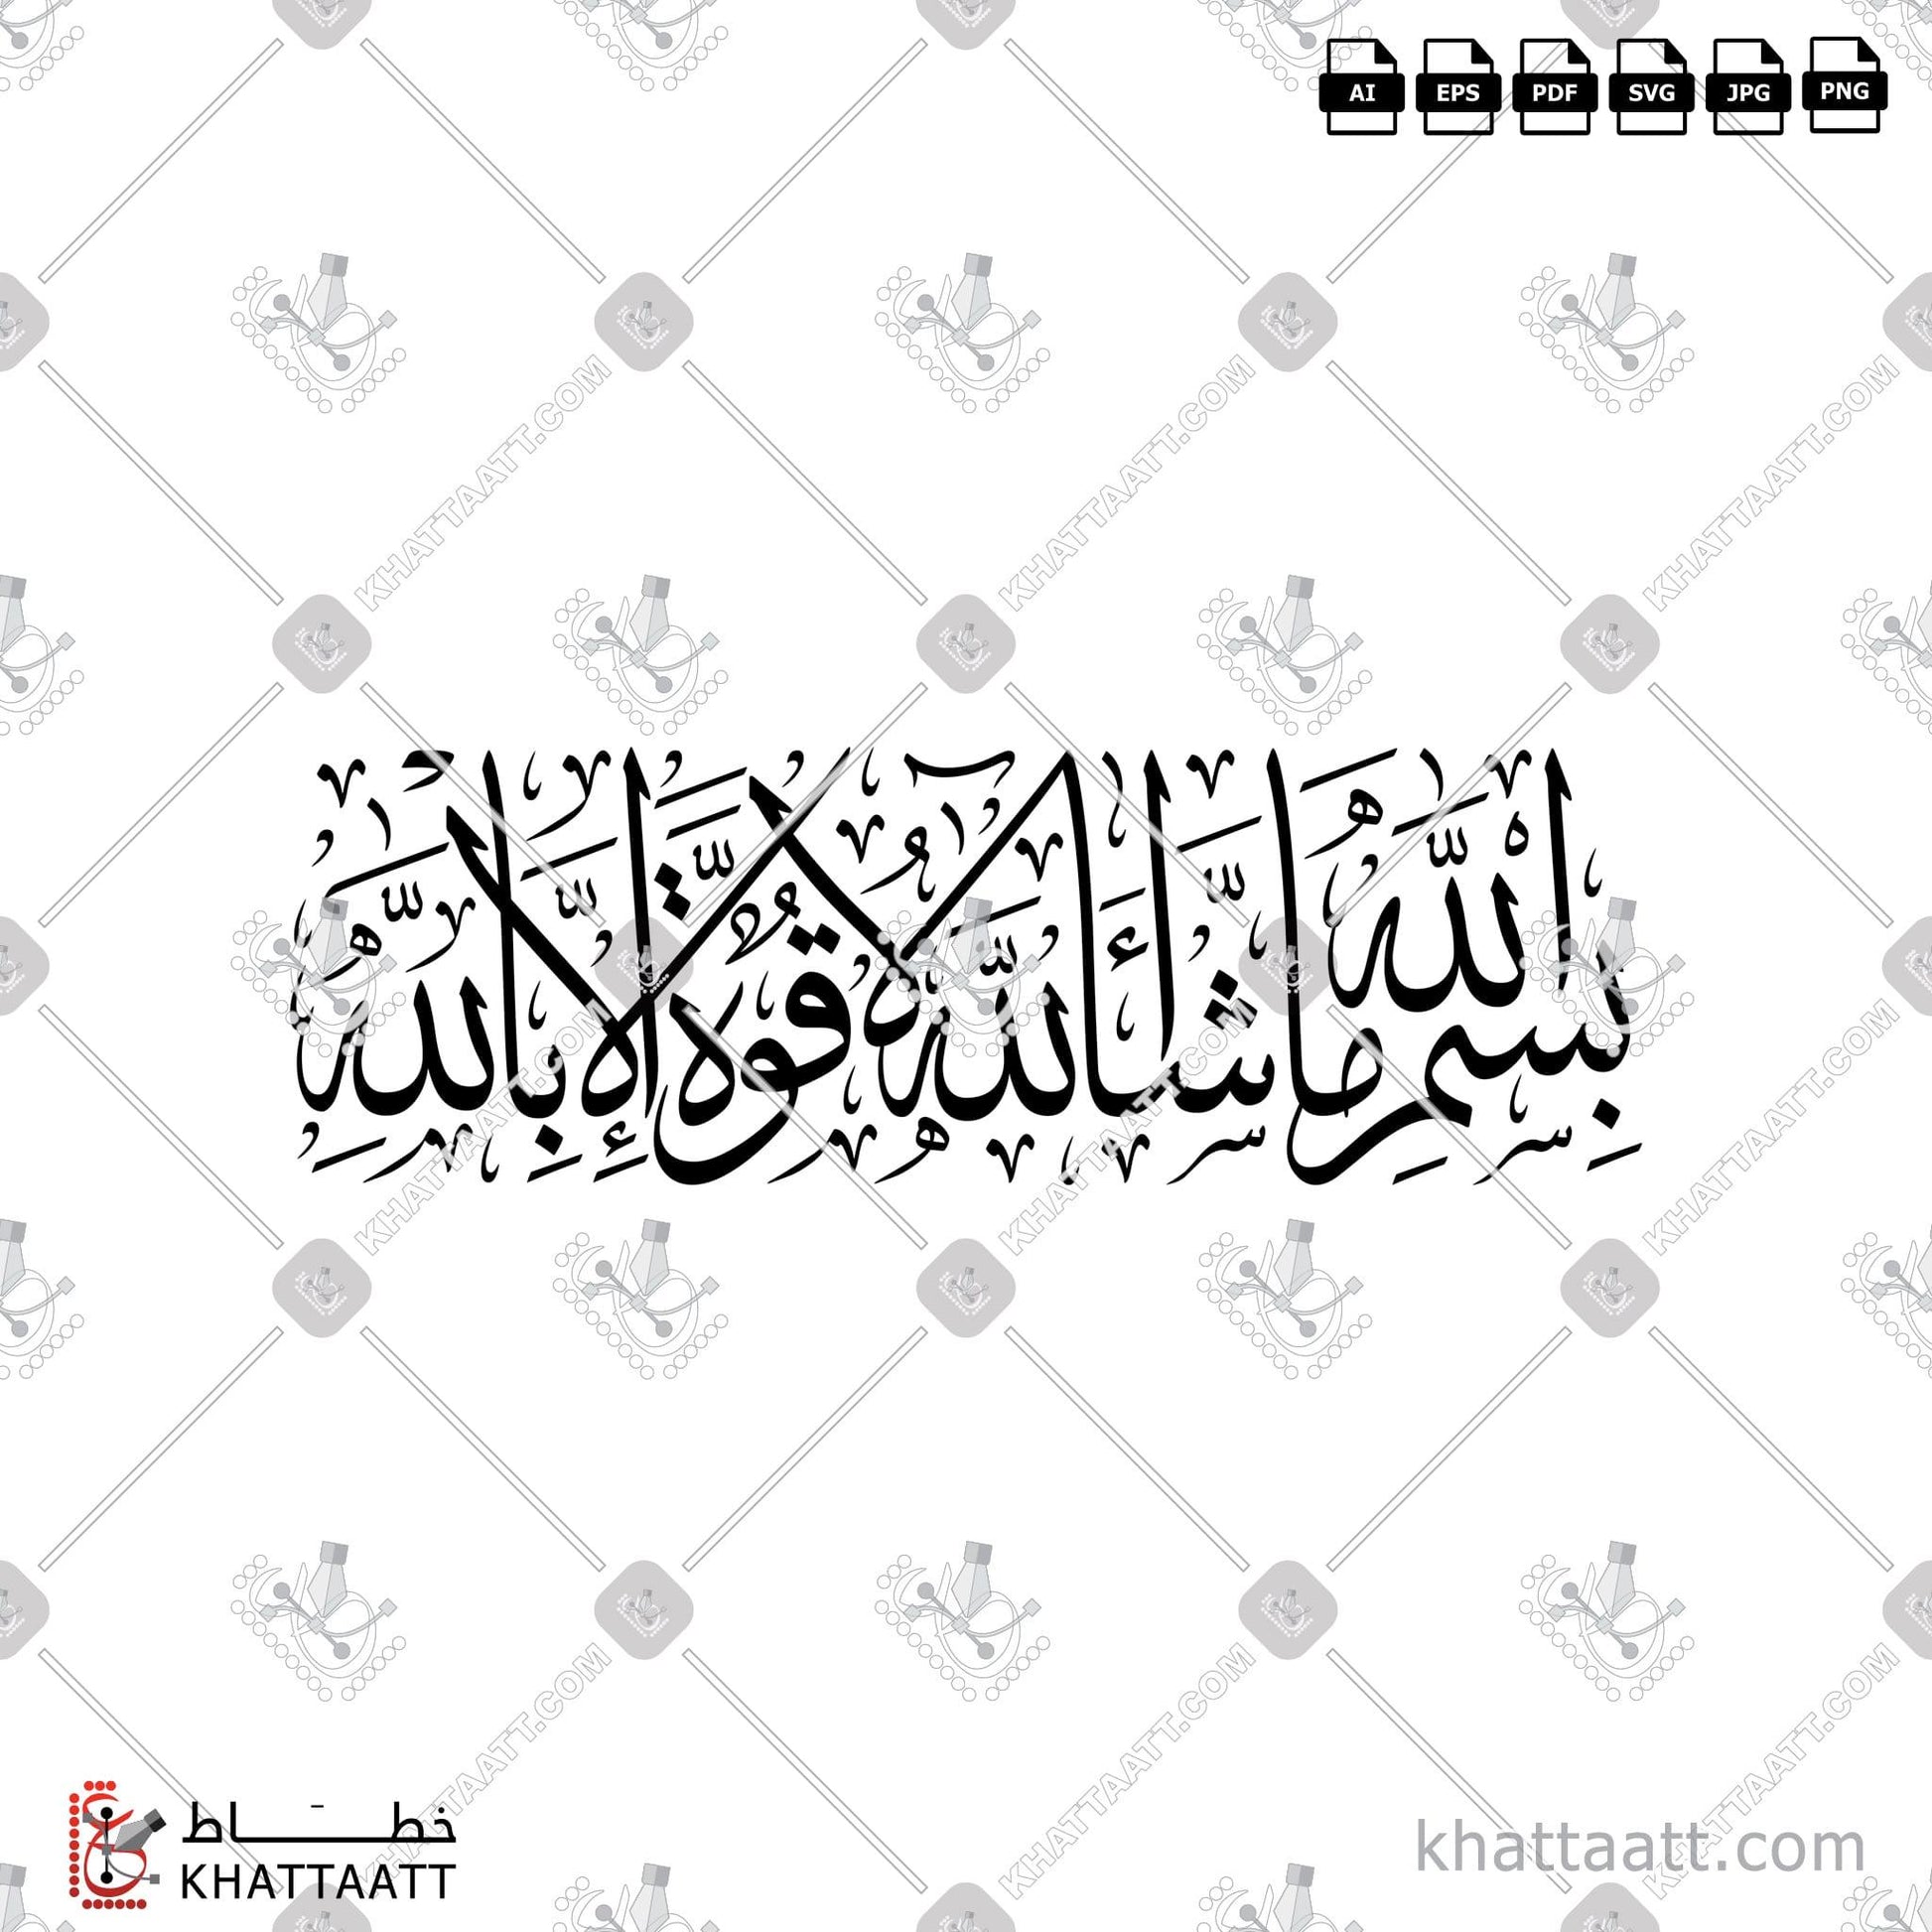 Download Arabic Calligraphy of بسم الله ما شاء الله لا قوة إلا بالله in Thuluth - خط الثلث in vector and .png